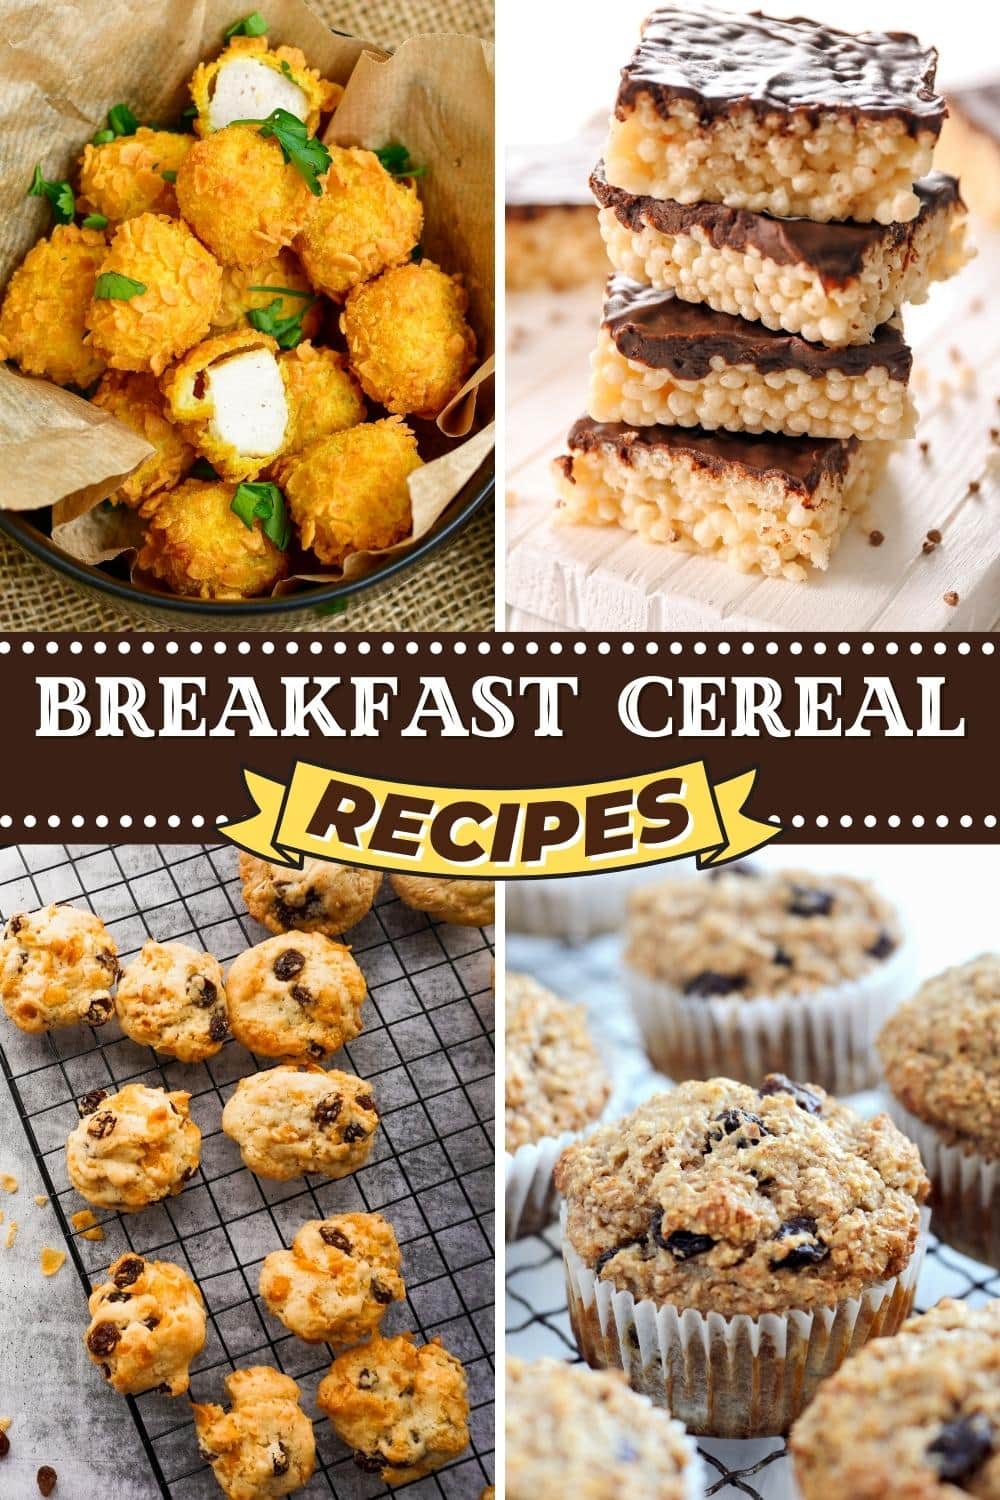 25 Easy Breakfast Cereal Recipes - Insanely Good